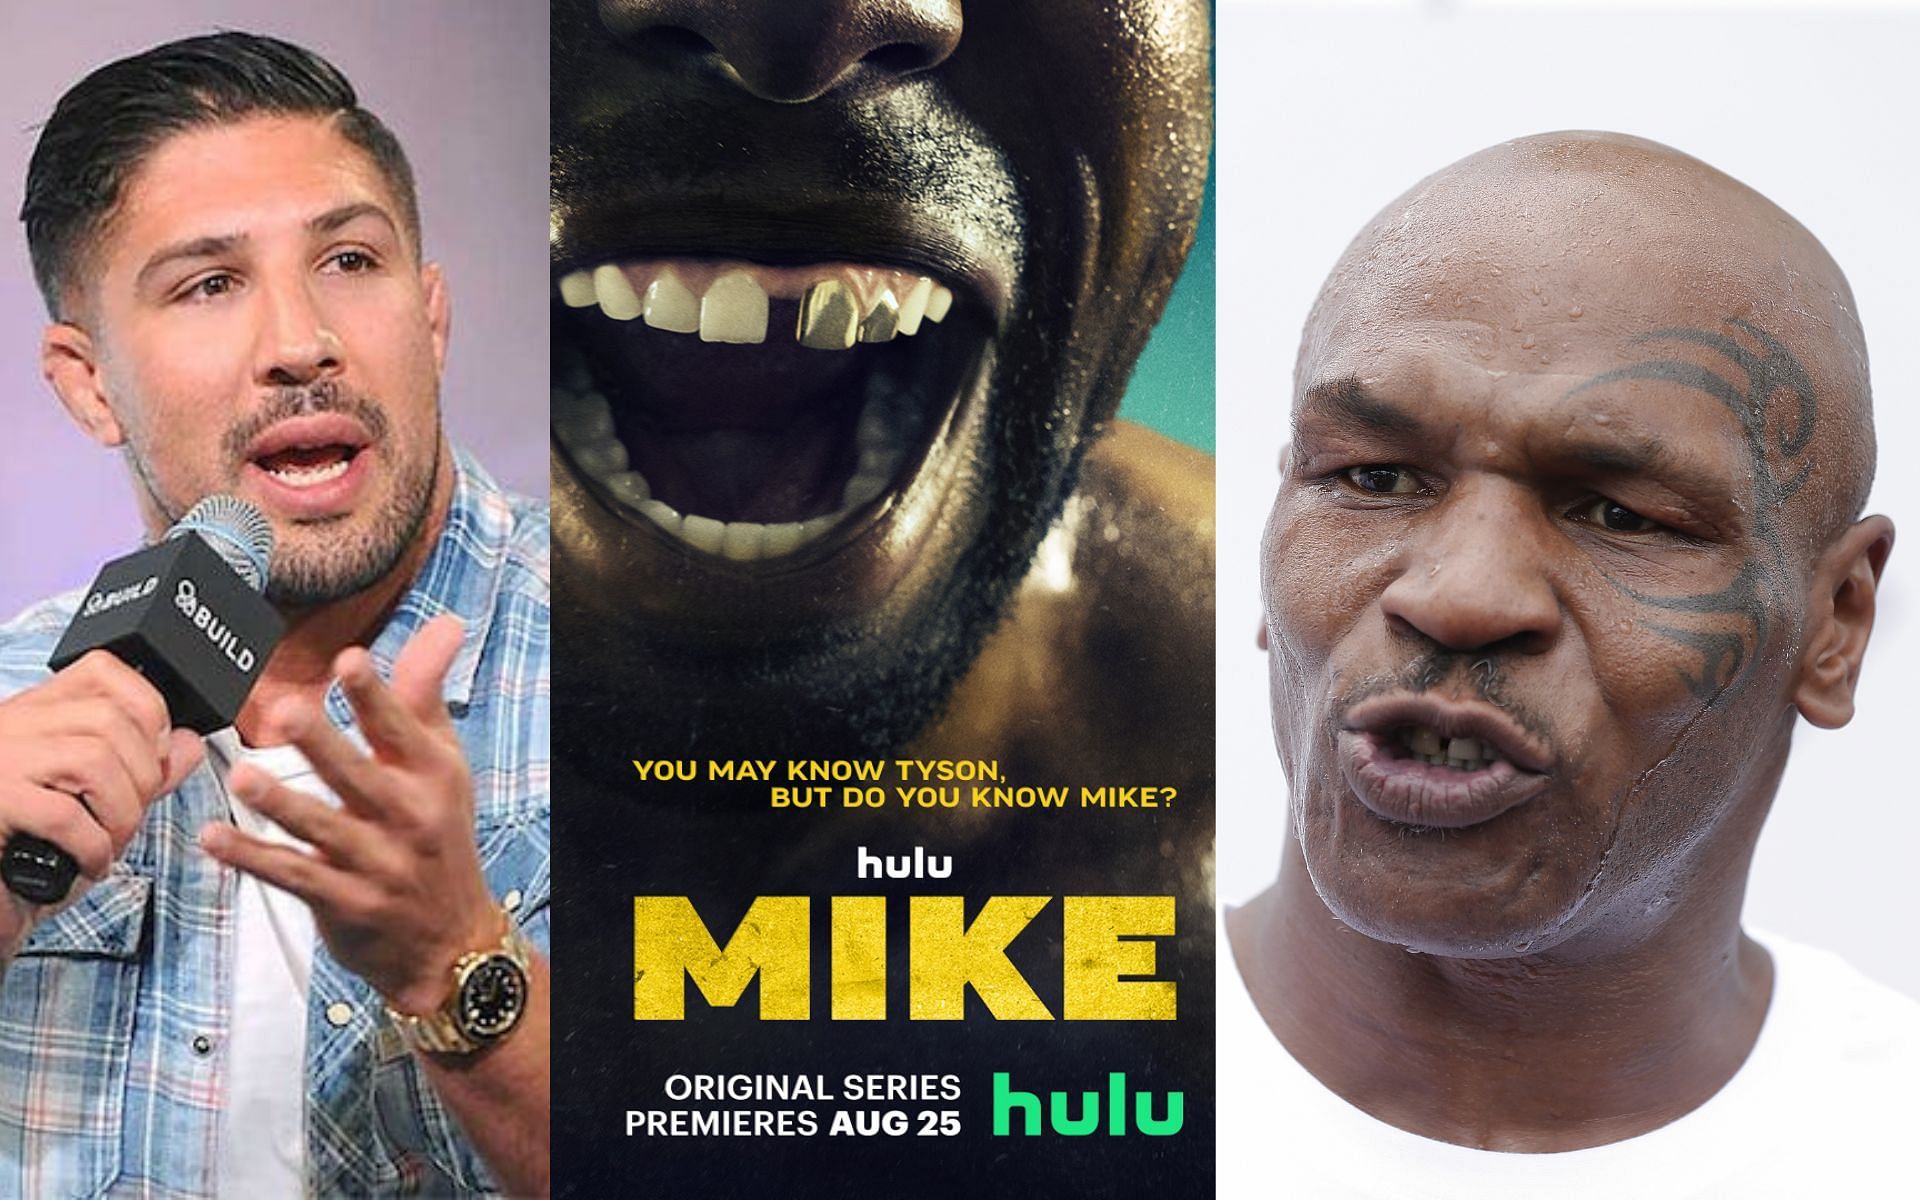 Brendan Schaub (left), &#039;Mike&#039; Hulu poster (center), and Mike Tyson (right) [Images courtesy: onnit.com, Hulu, and Getty Images]